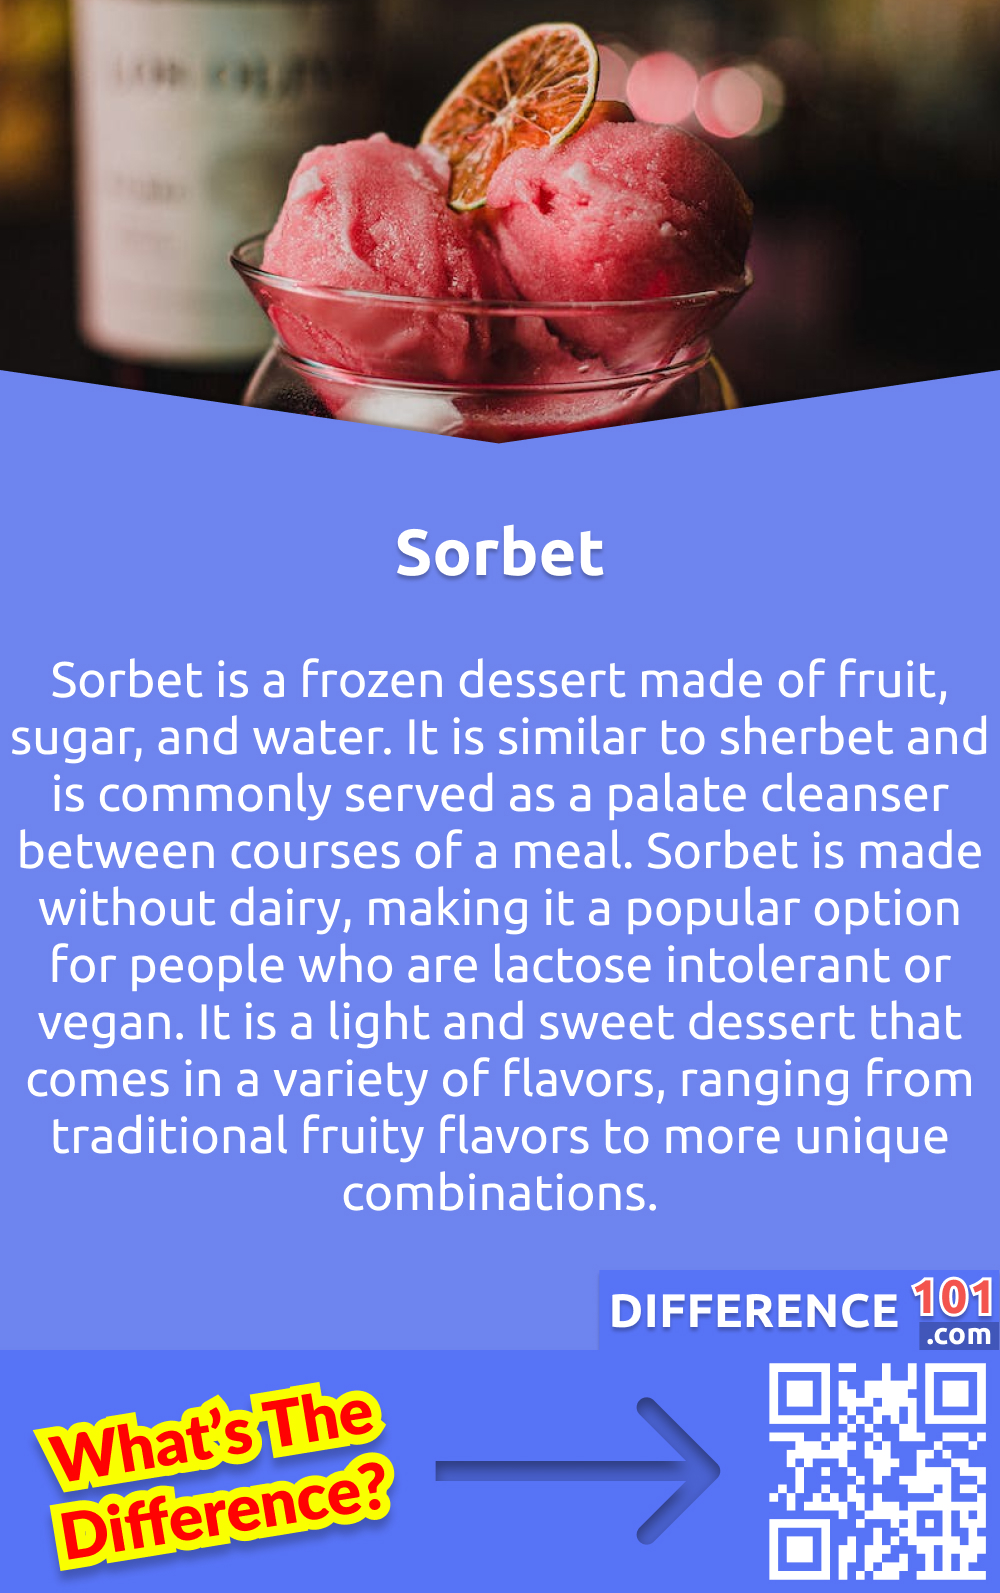 What Is Sorbet? Sorbet is a frozen dessert made of fruit, sugar, and water. It is similar to sherbet and is commonly served as a palate cleanser between courses of a meal. It is also a refreshing summertime treat. Sorbet is made without dairy, making it a popular option for people who are lactose intolerant or vegan. It is a light and sweet dessert that comes in a variety of flavors, ranging from traditional fruity flavors to more unique combinations. Sorbet is a great choice for an after dinner treat or a light snack. It is a low-calorie dessert option that can be enjoyed guilt-free. Sorbet is an easy, delicious way to beat the summer heat and satisfy a sweet tooth.